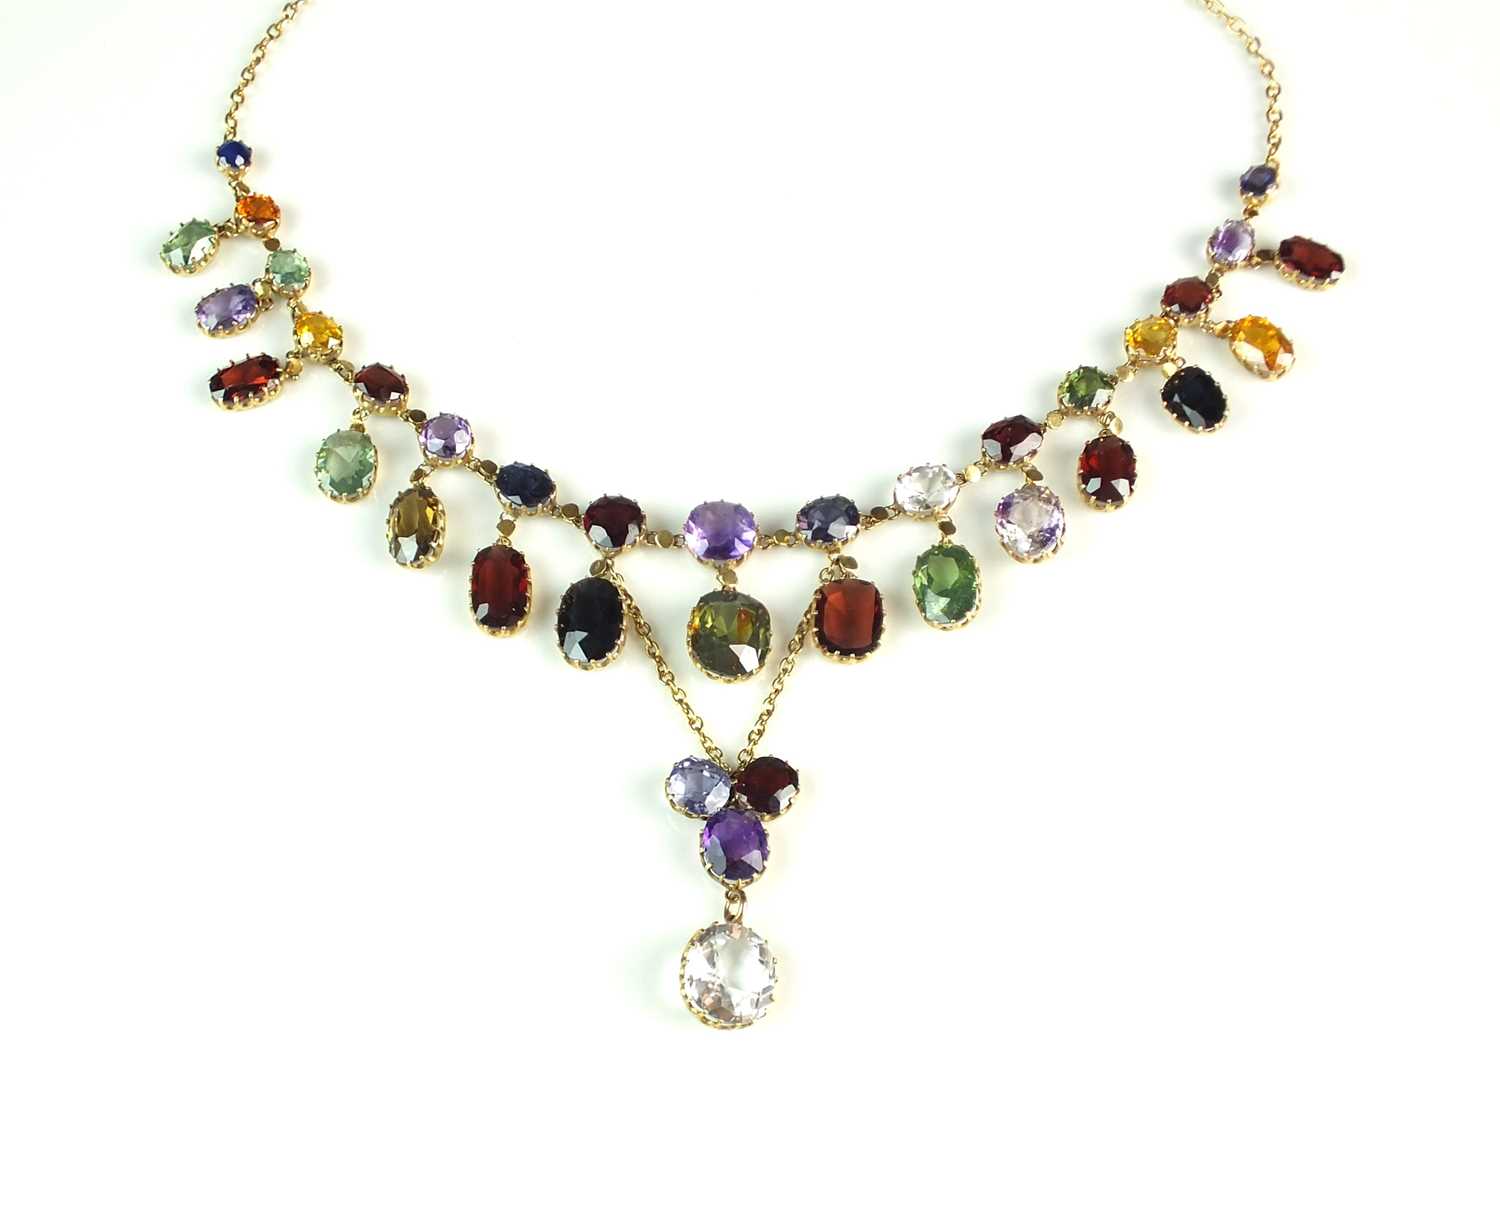 23 - A late 19th/early 20th century multi-gem set fringe necklace